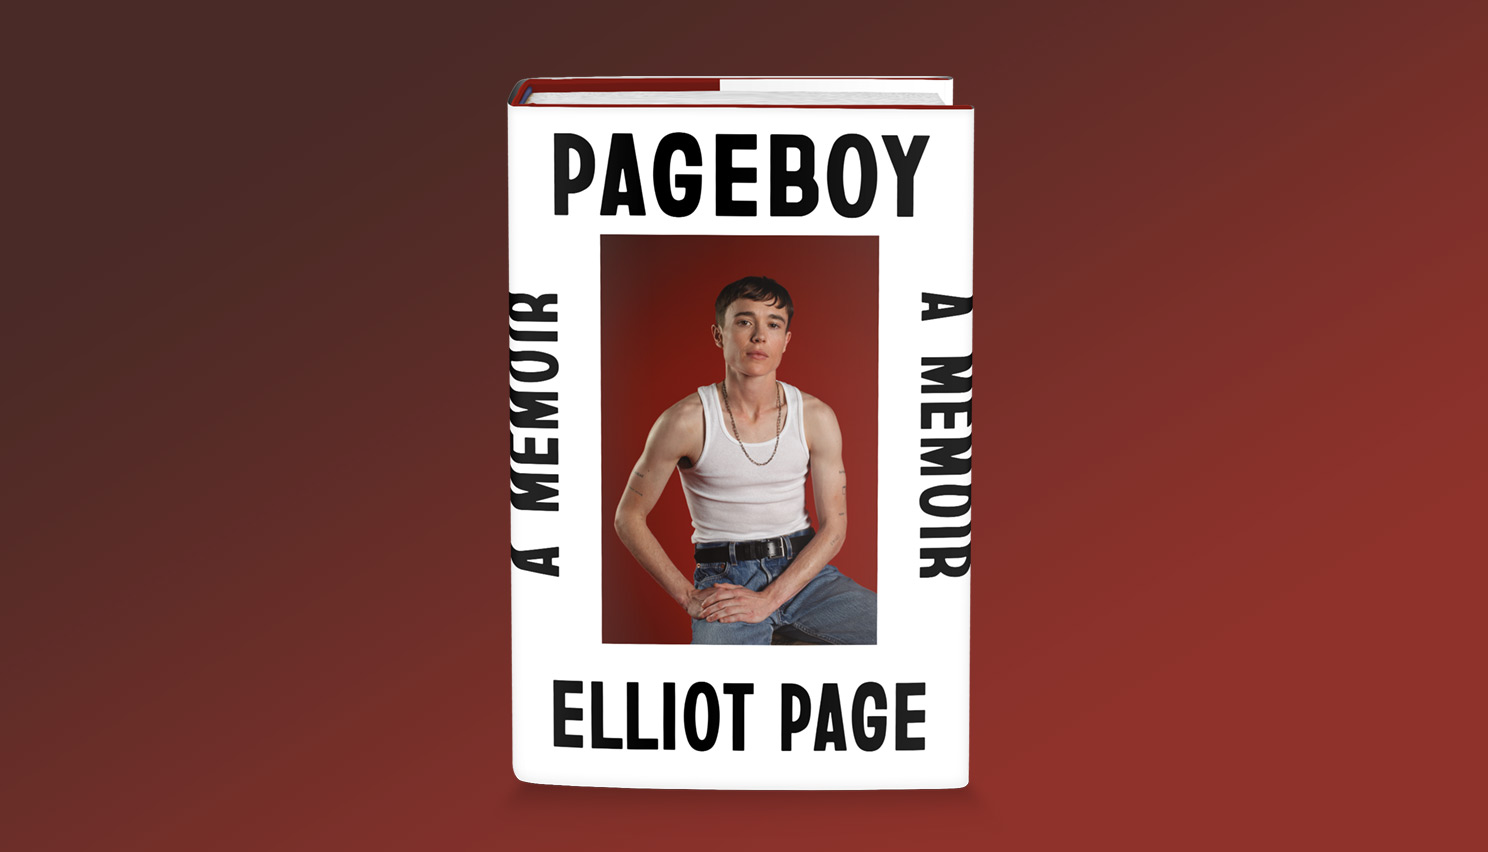 Build Your Pride Month TBR Pile: A Guest Post from Elliot Page, Author of Pageboy 